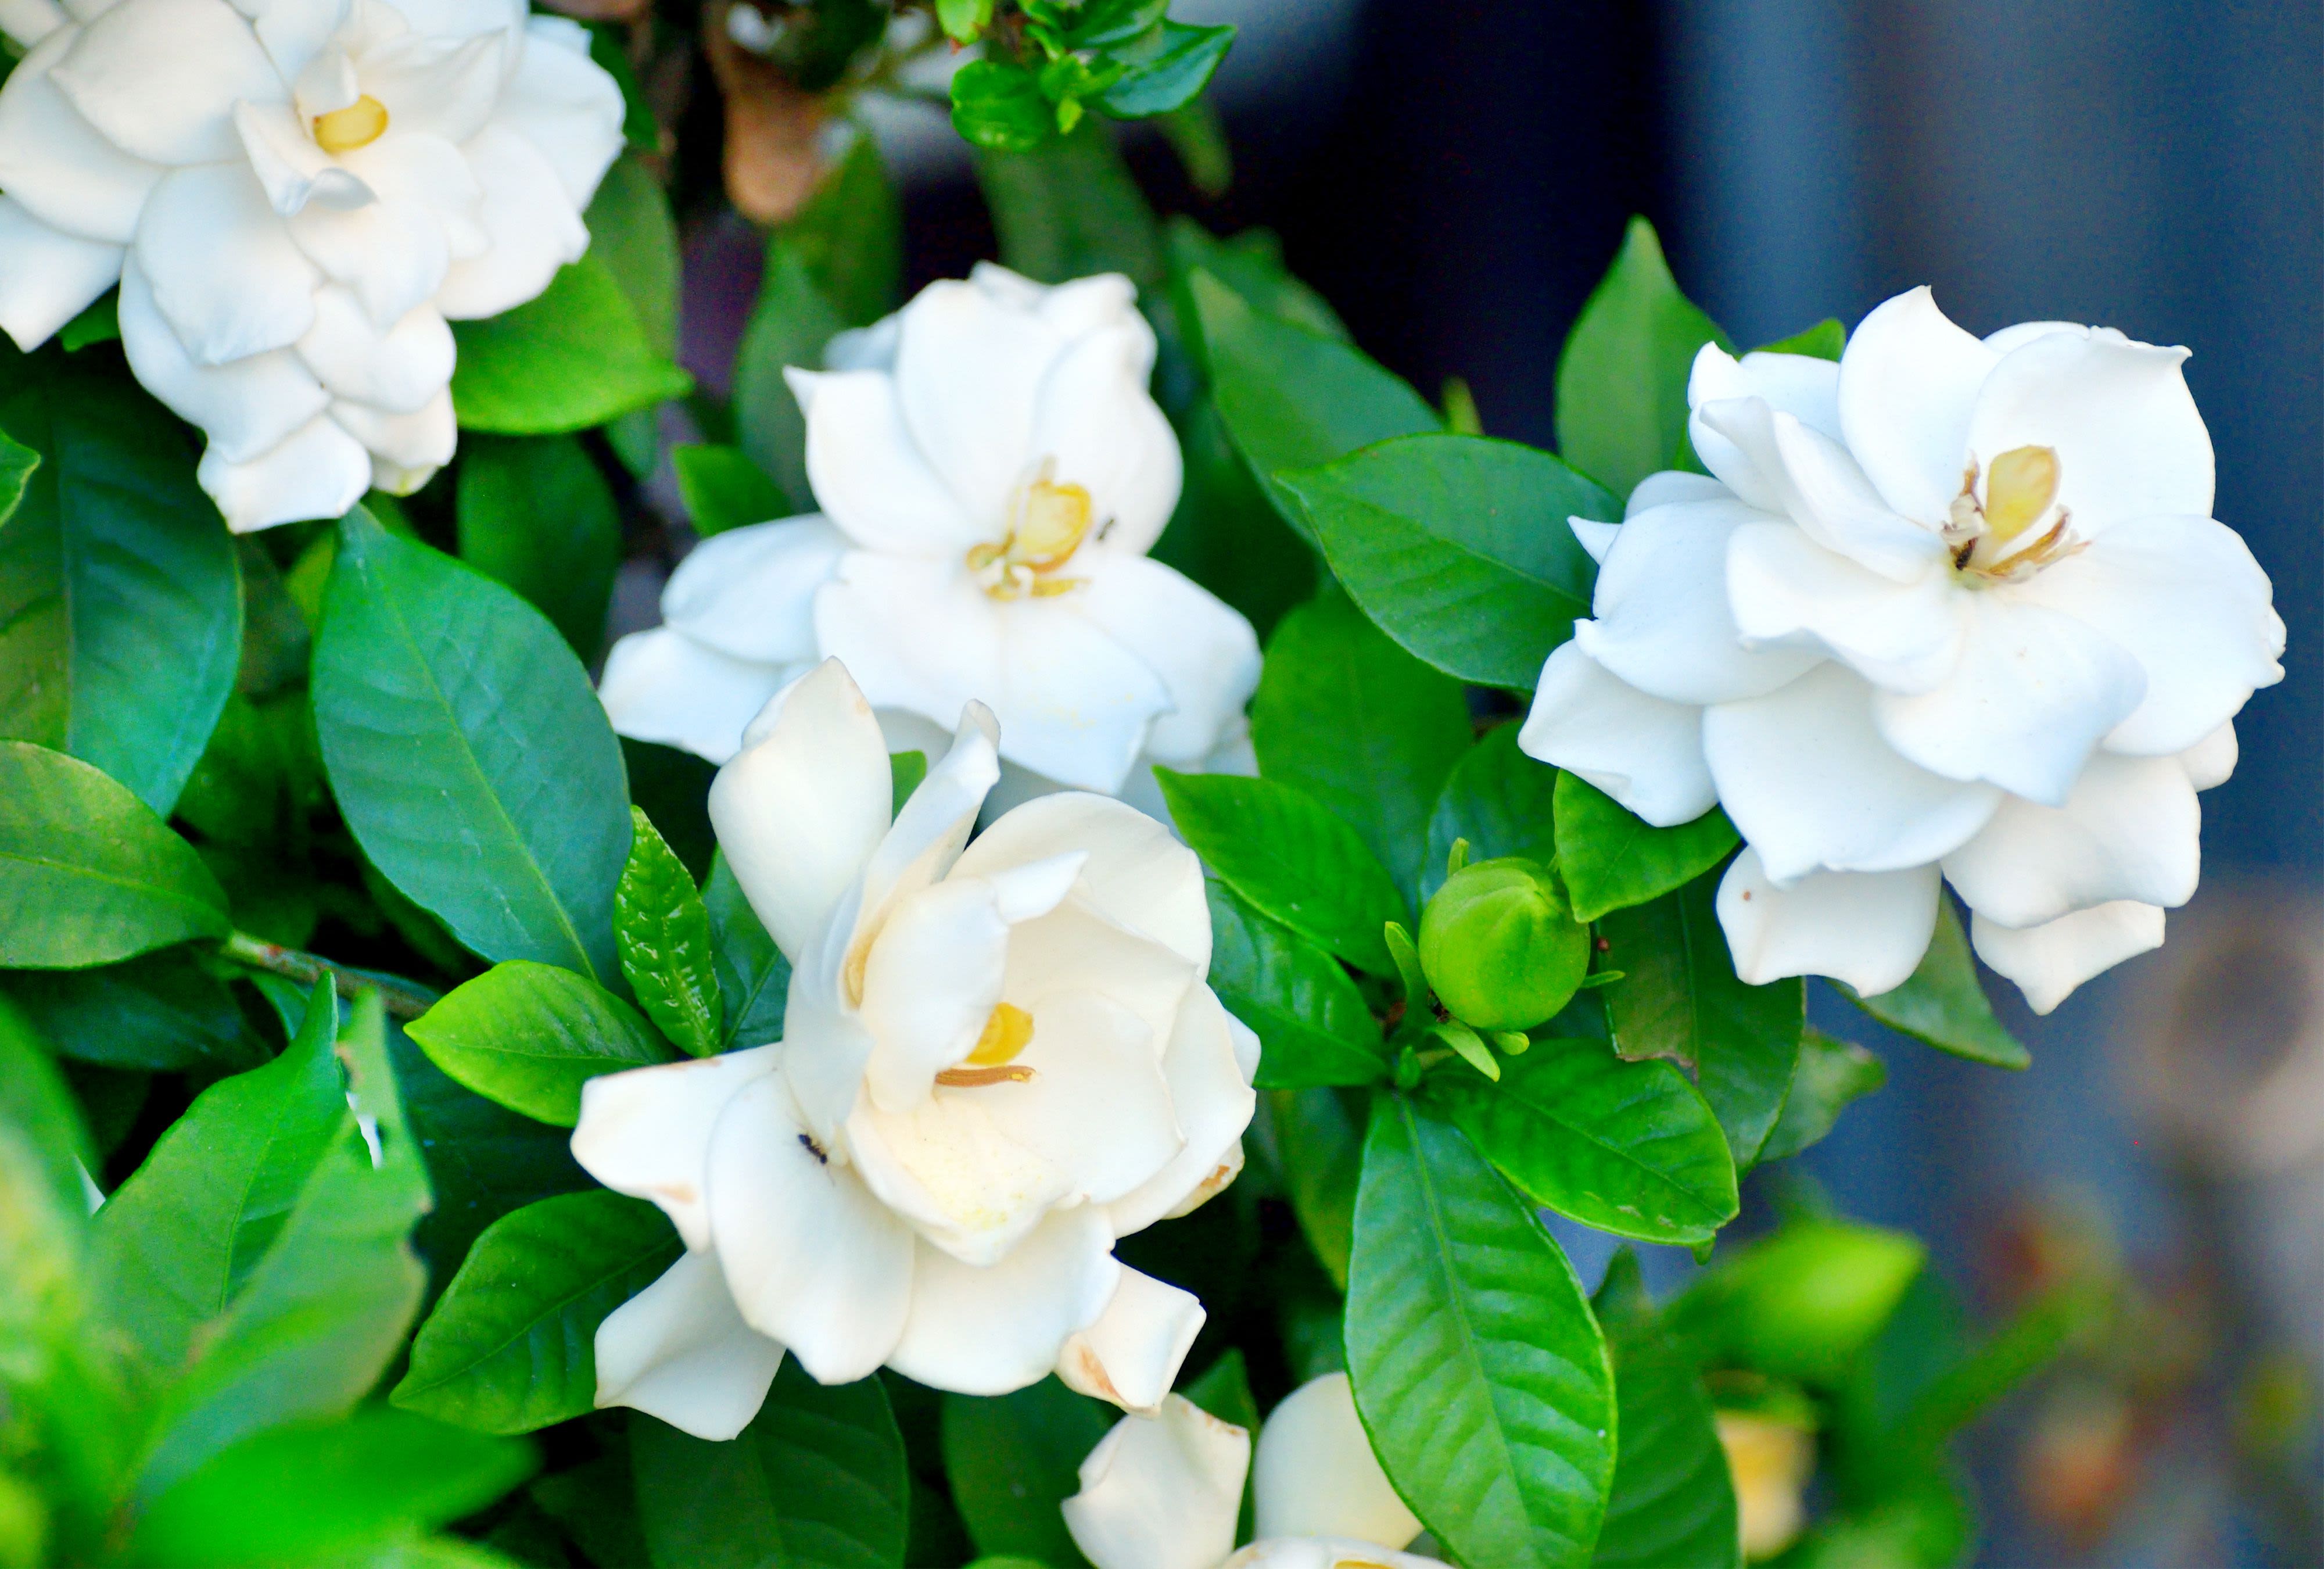 Yes, You Should Fertilize Gardenias Regularly to Get More Flowers—Here's How